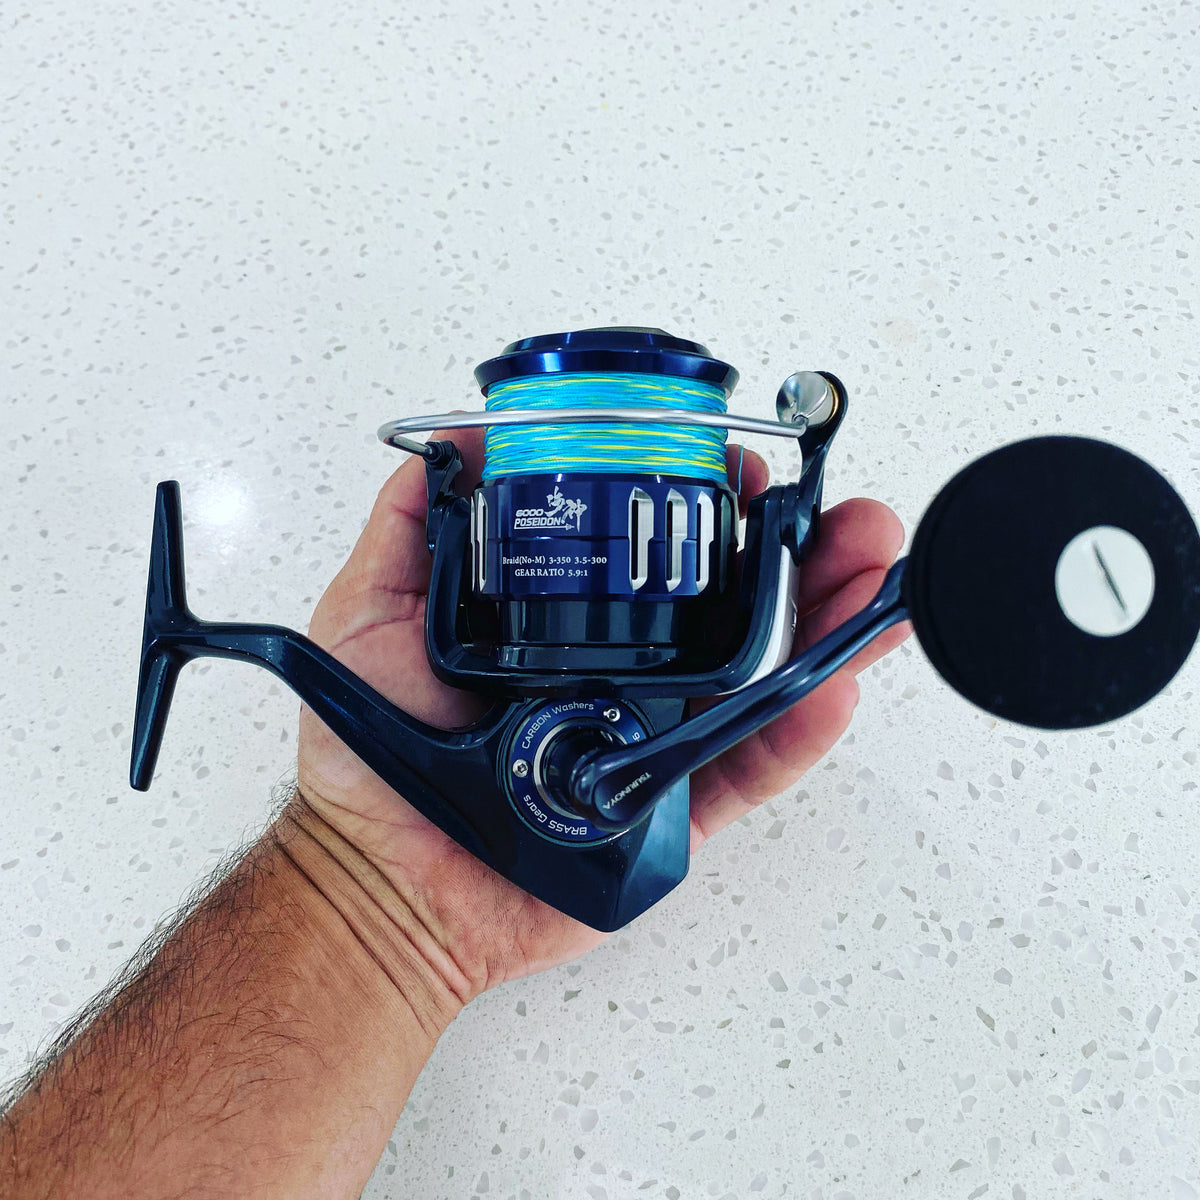 Abrolhos Poseidon 6000 Spin Reel - What's in the box? Our new jigging reel  revealed! 